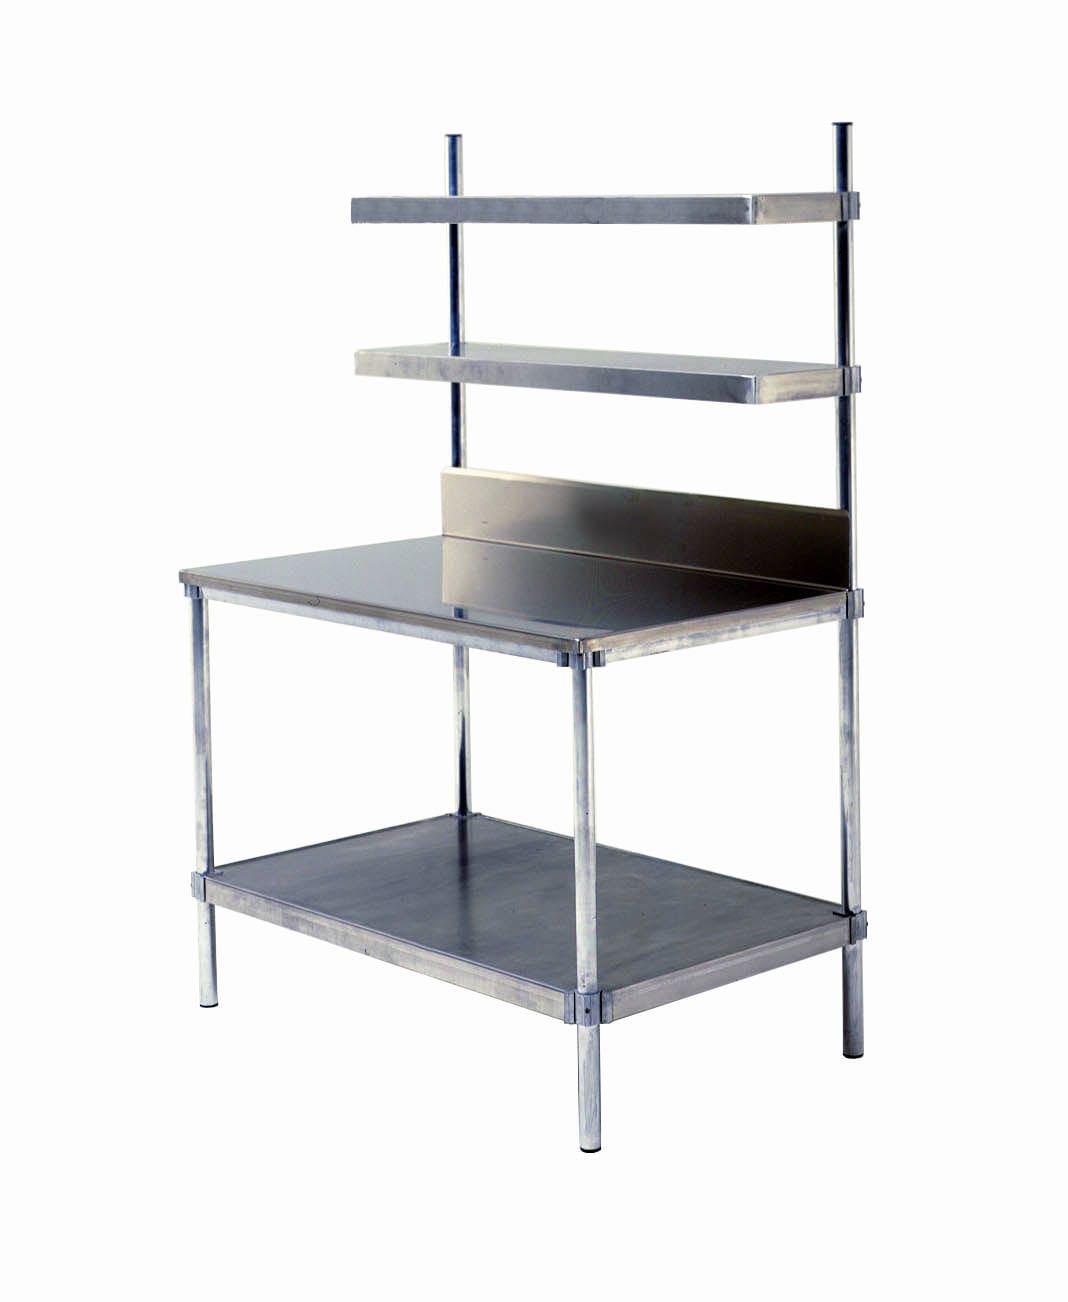 Aluminum/Stainless Top Work Stations